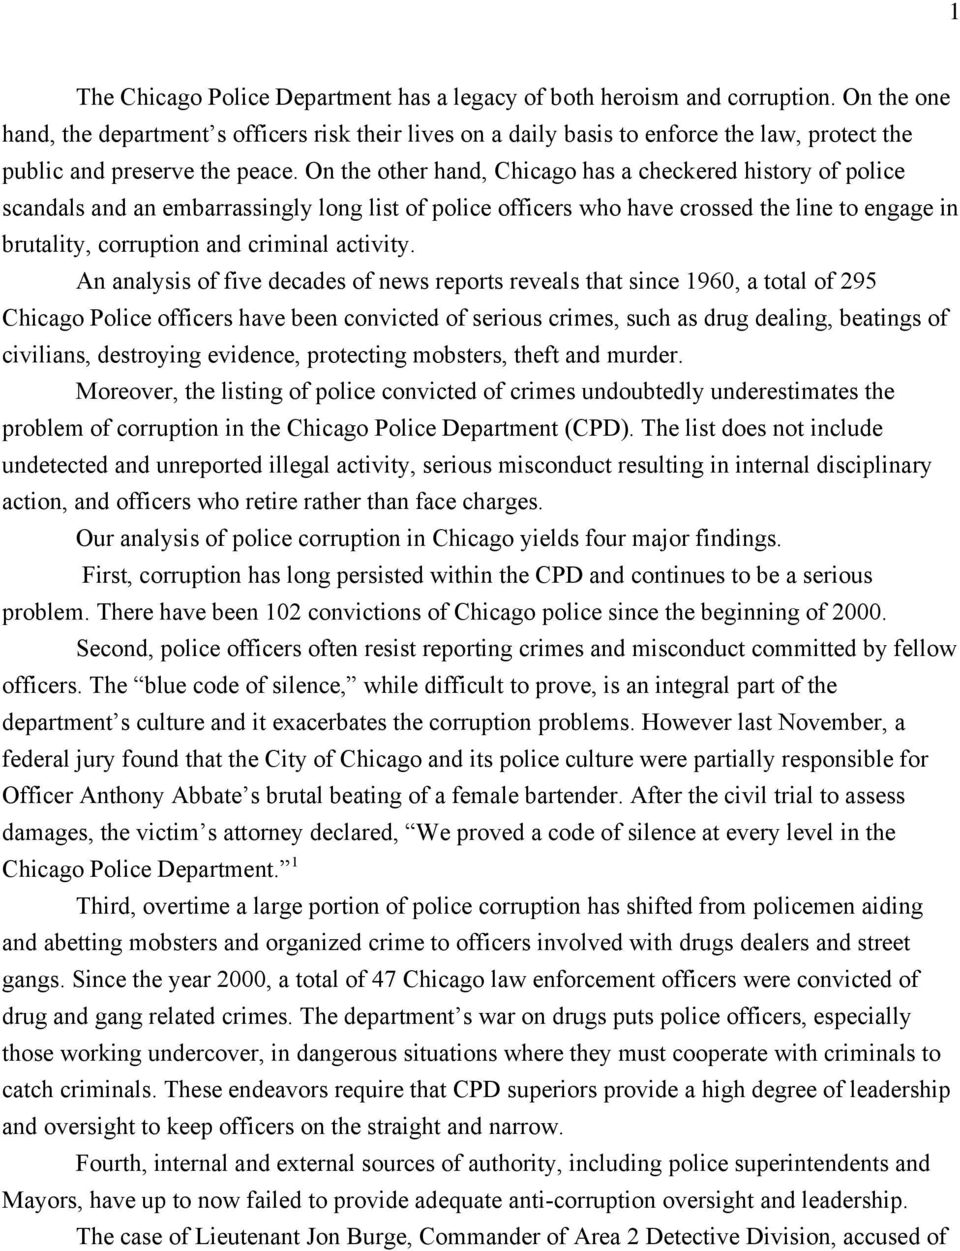 On the other hand, Chicago has a checkered history of police scandals and an embarrassingly long list of police officers who have crossed the line to engage in brutality, corruption and criminal